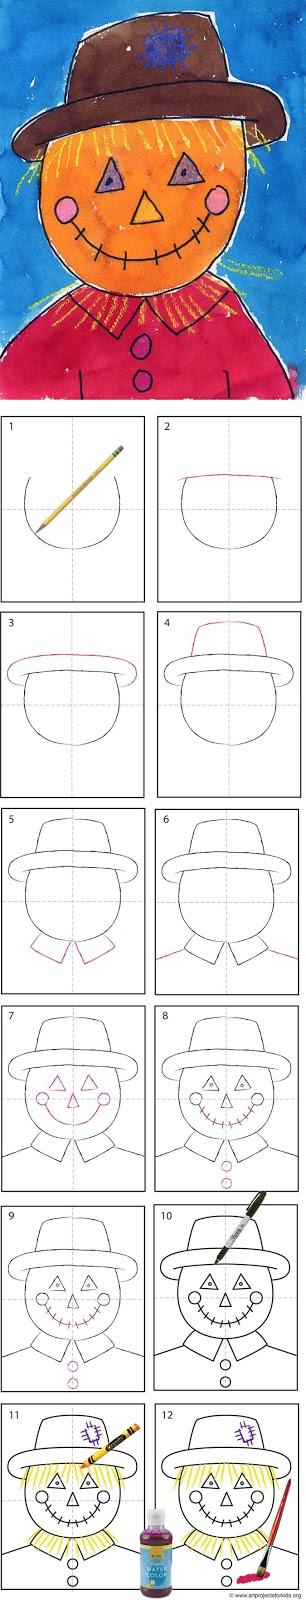 How to Draw a Scarecrow Tutorial